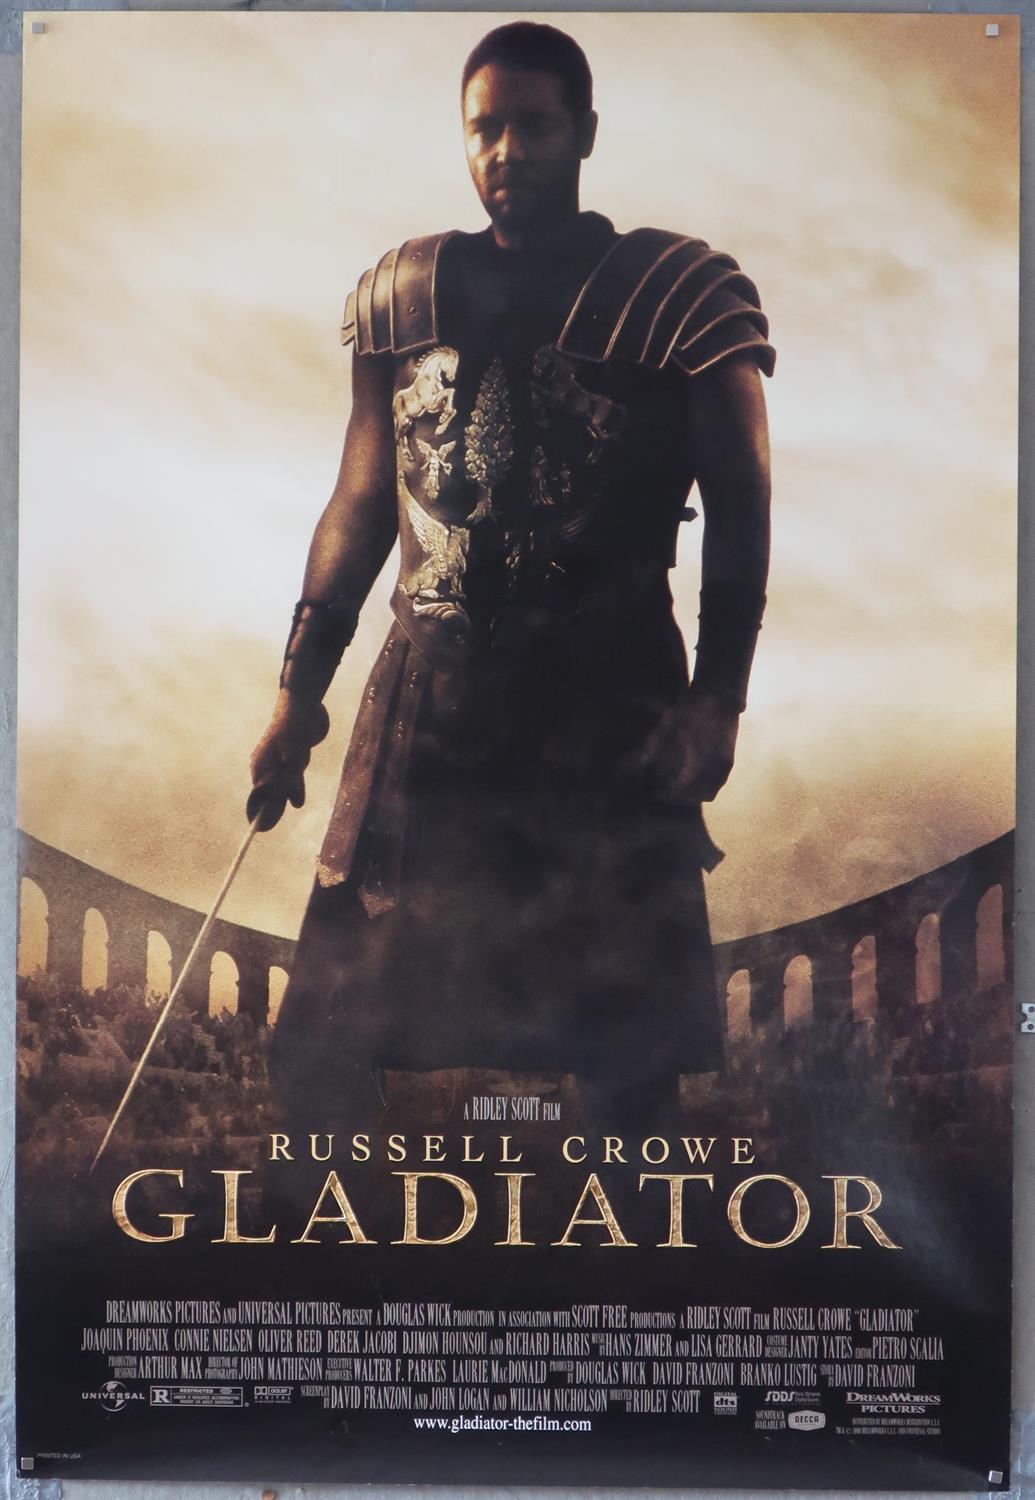 Gladiator (2000) US One sheet film poster, directed by Ridley Scott and starring Russell Crowe,